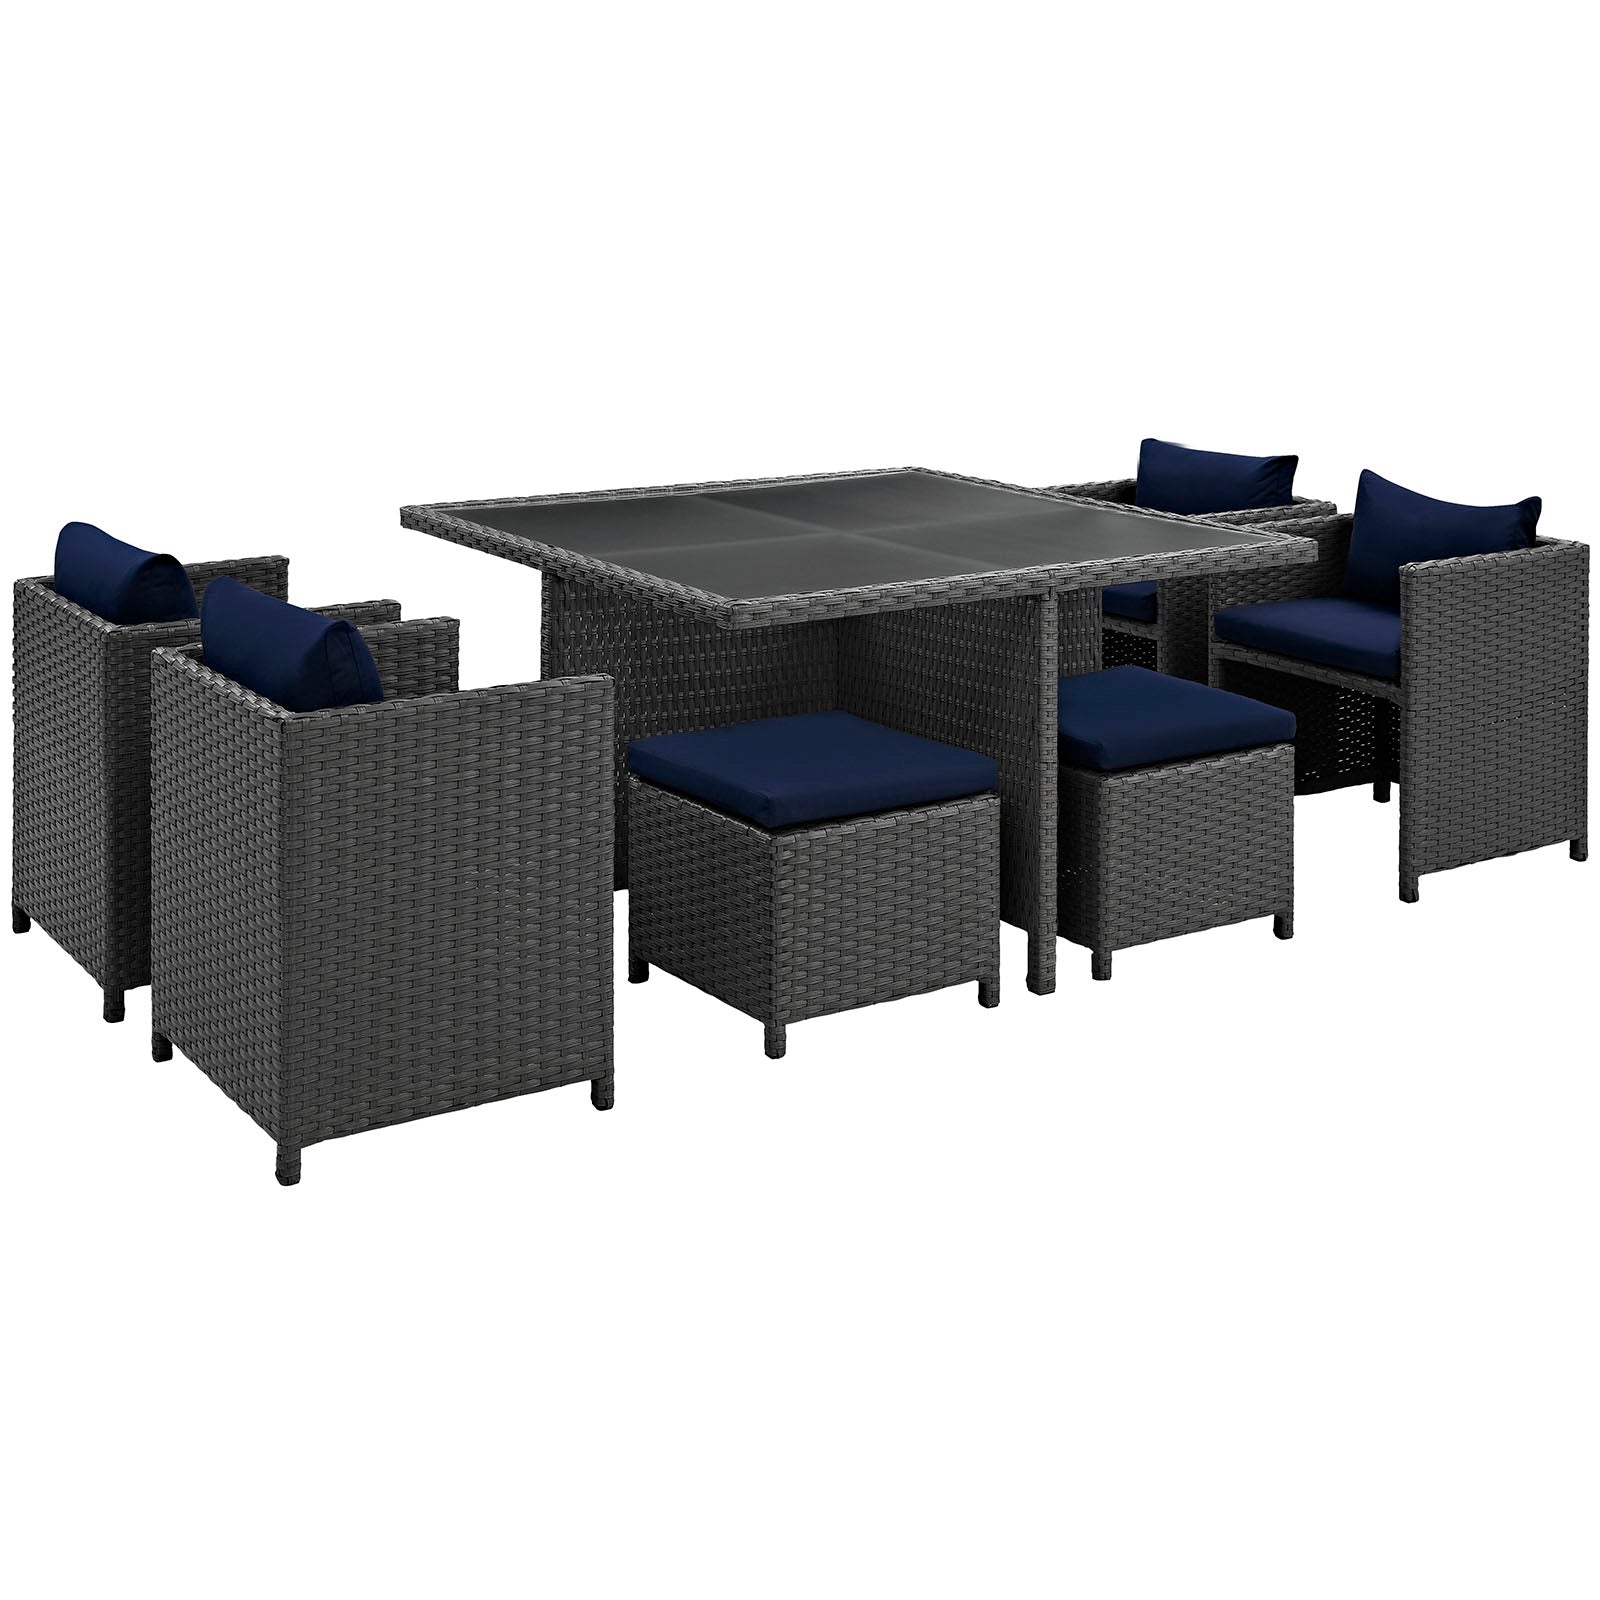 Sojourn 9 Piece Outdoor Patio Dining Set Canvas Navy